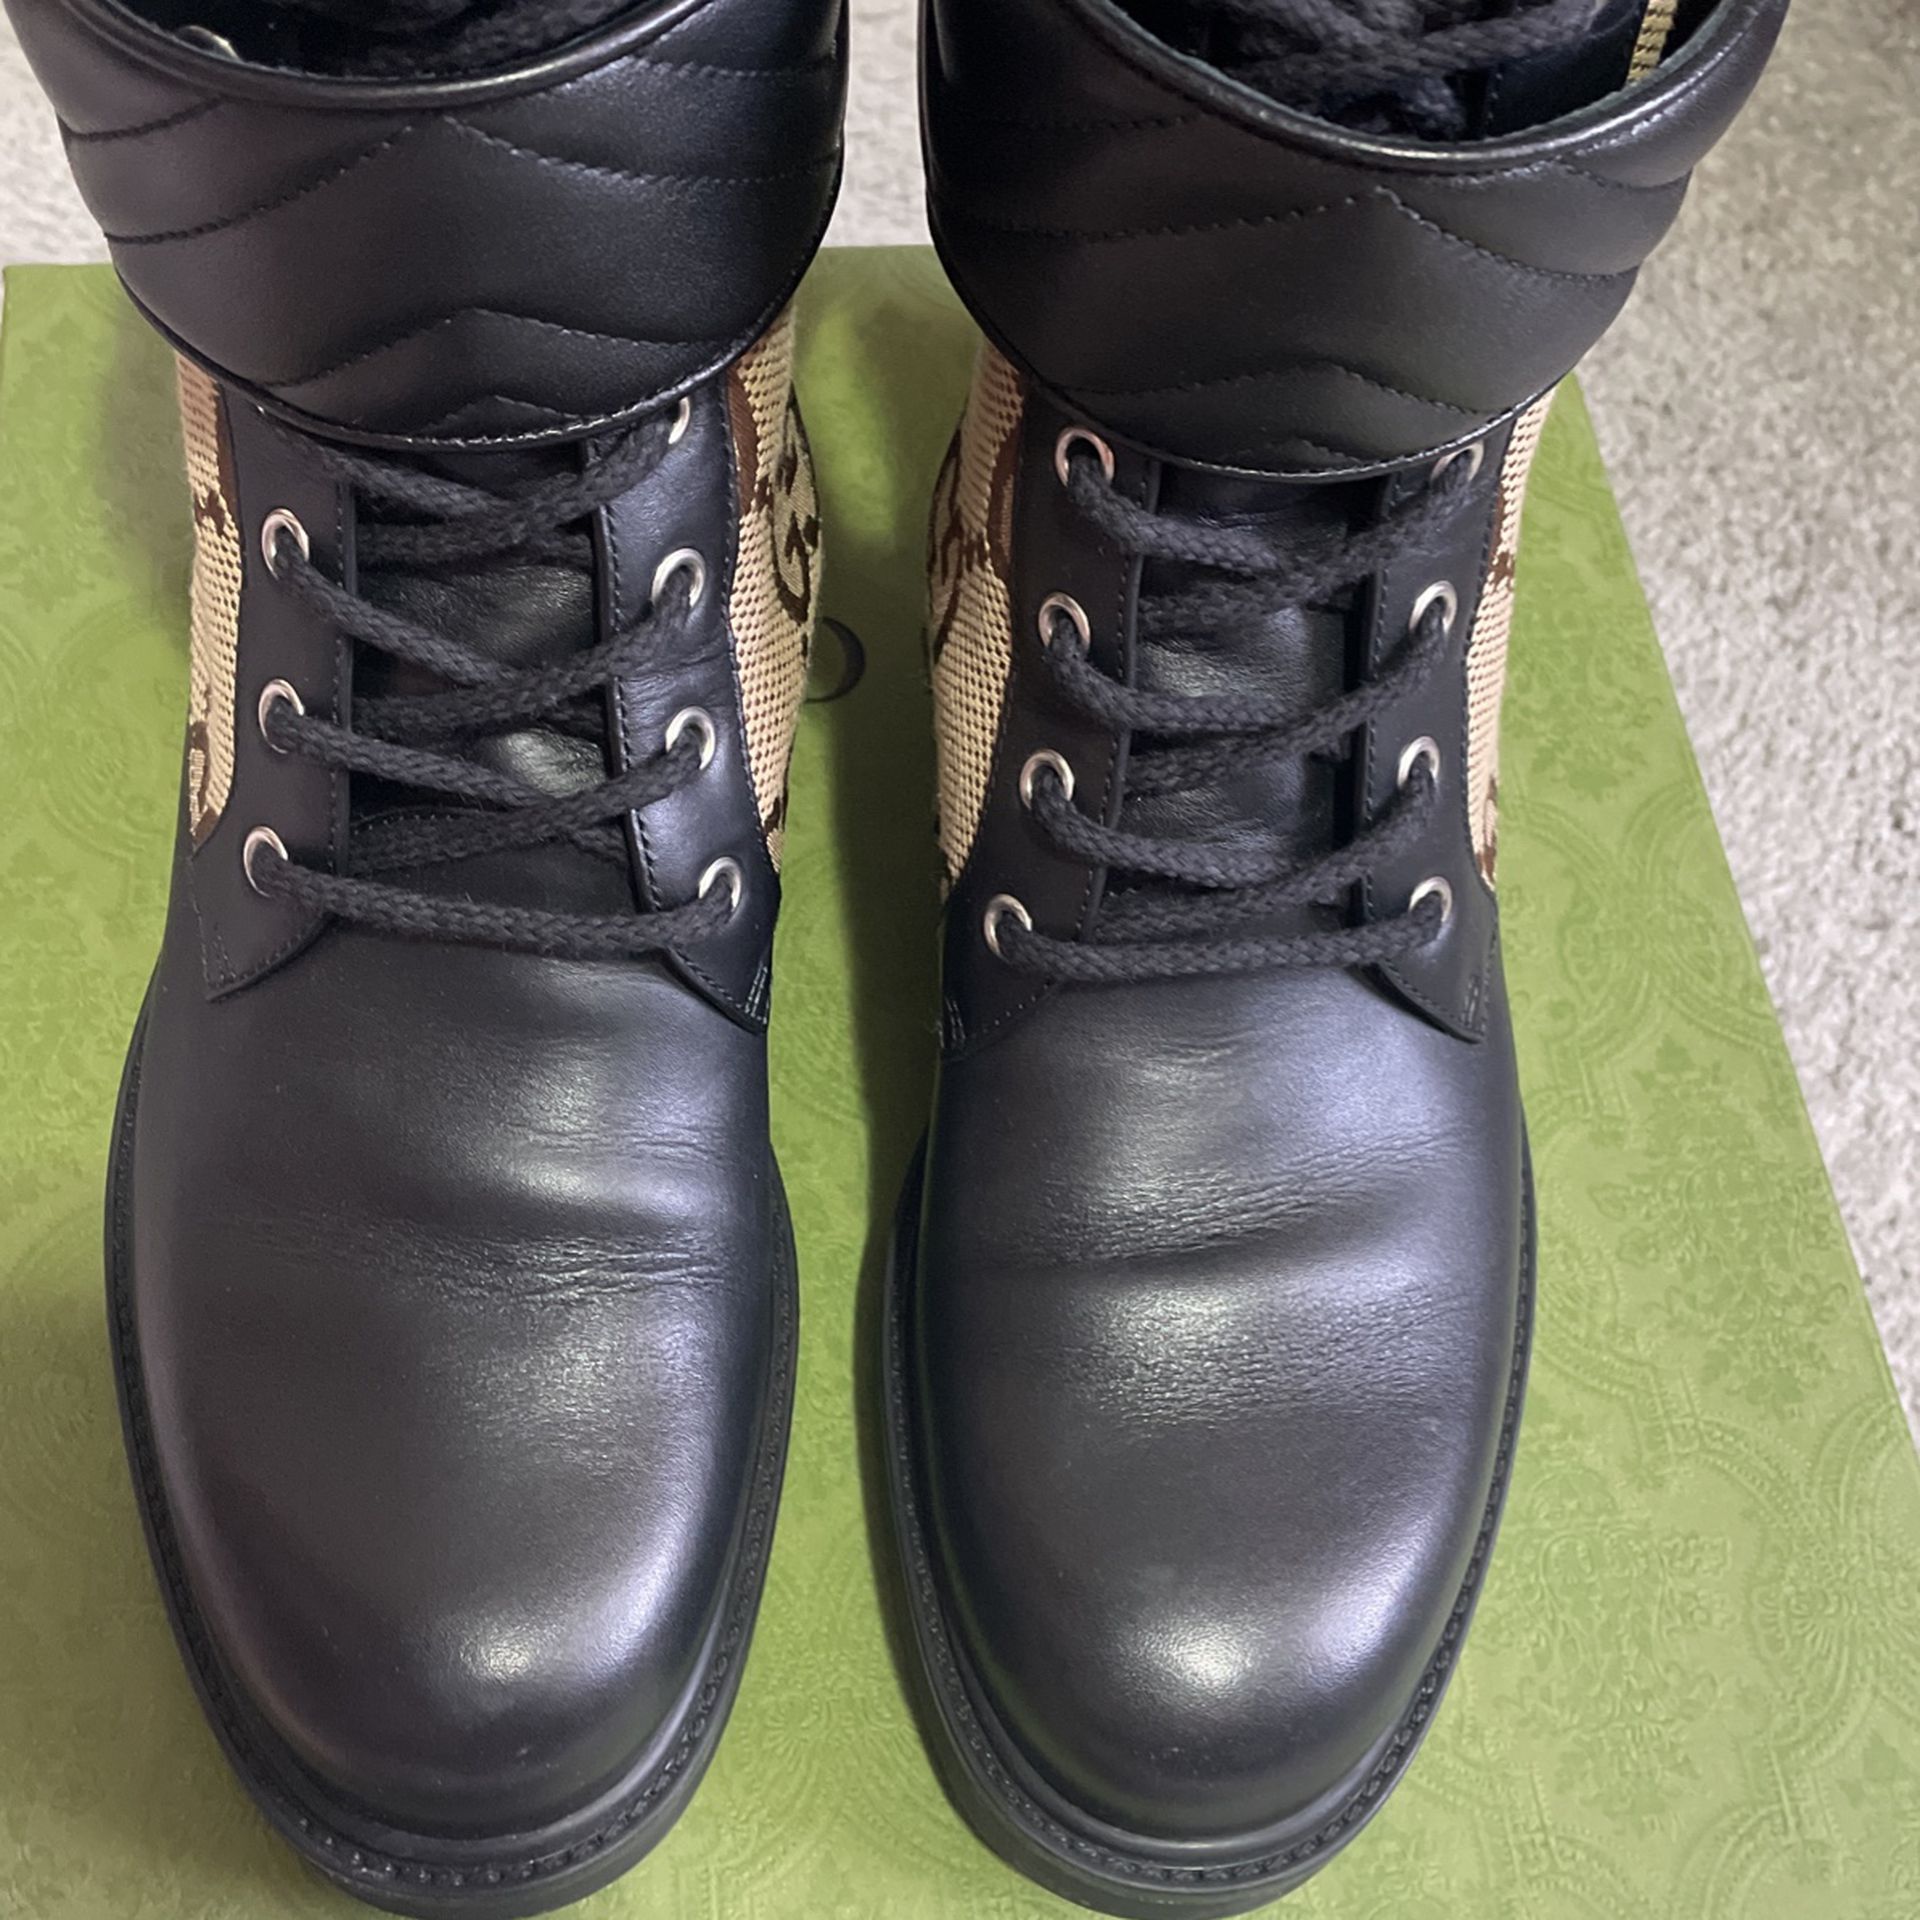 Women Gucci Boots Size 10.5 for Sale in Union City, NJ - OfferUp